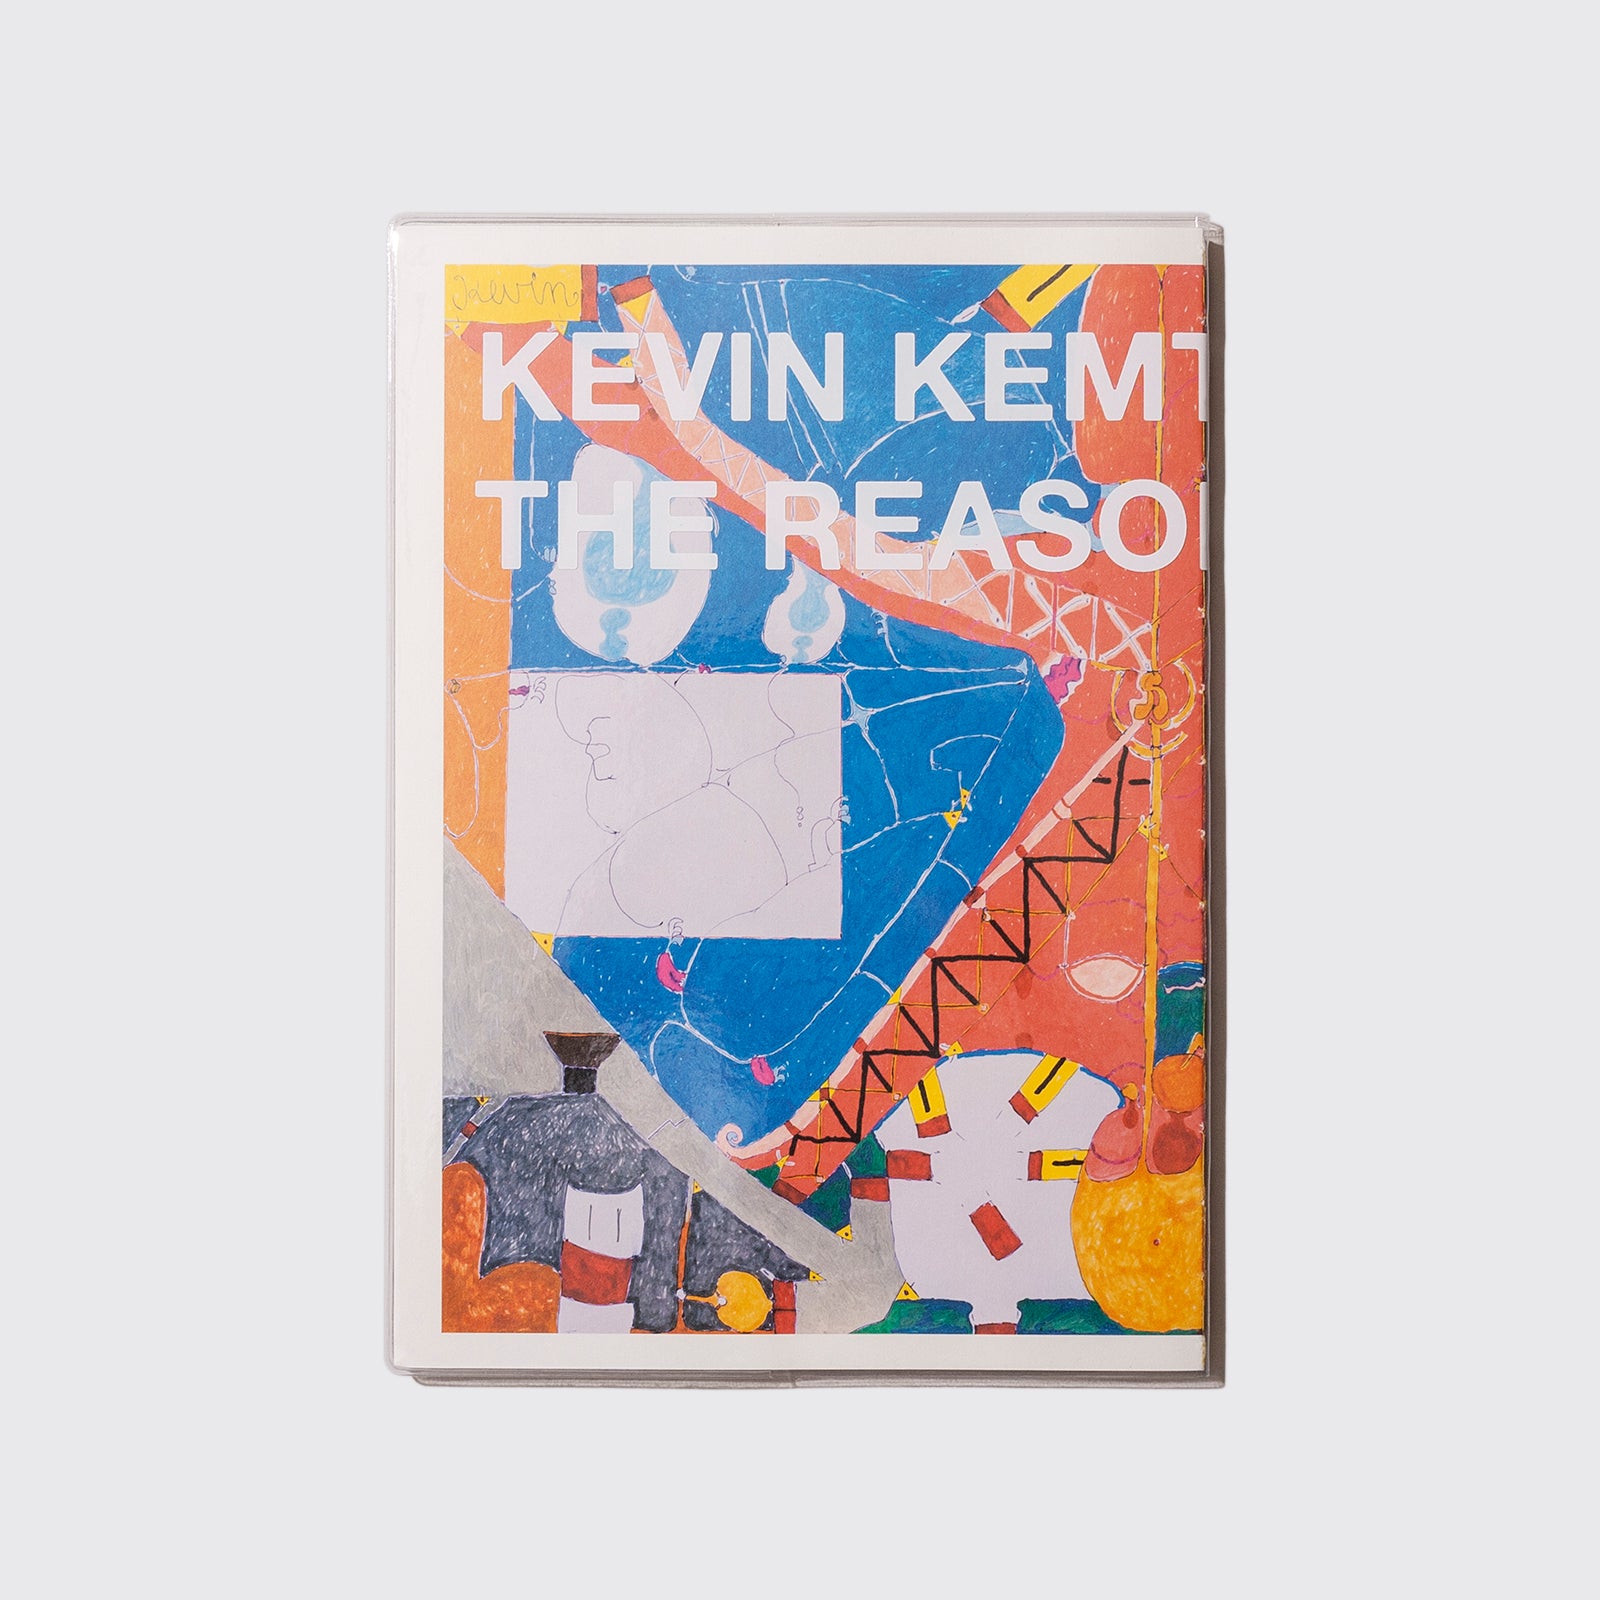 KEVIN KEMTER -  THE REASON KNOWERS